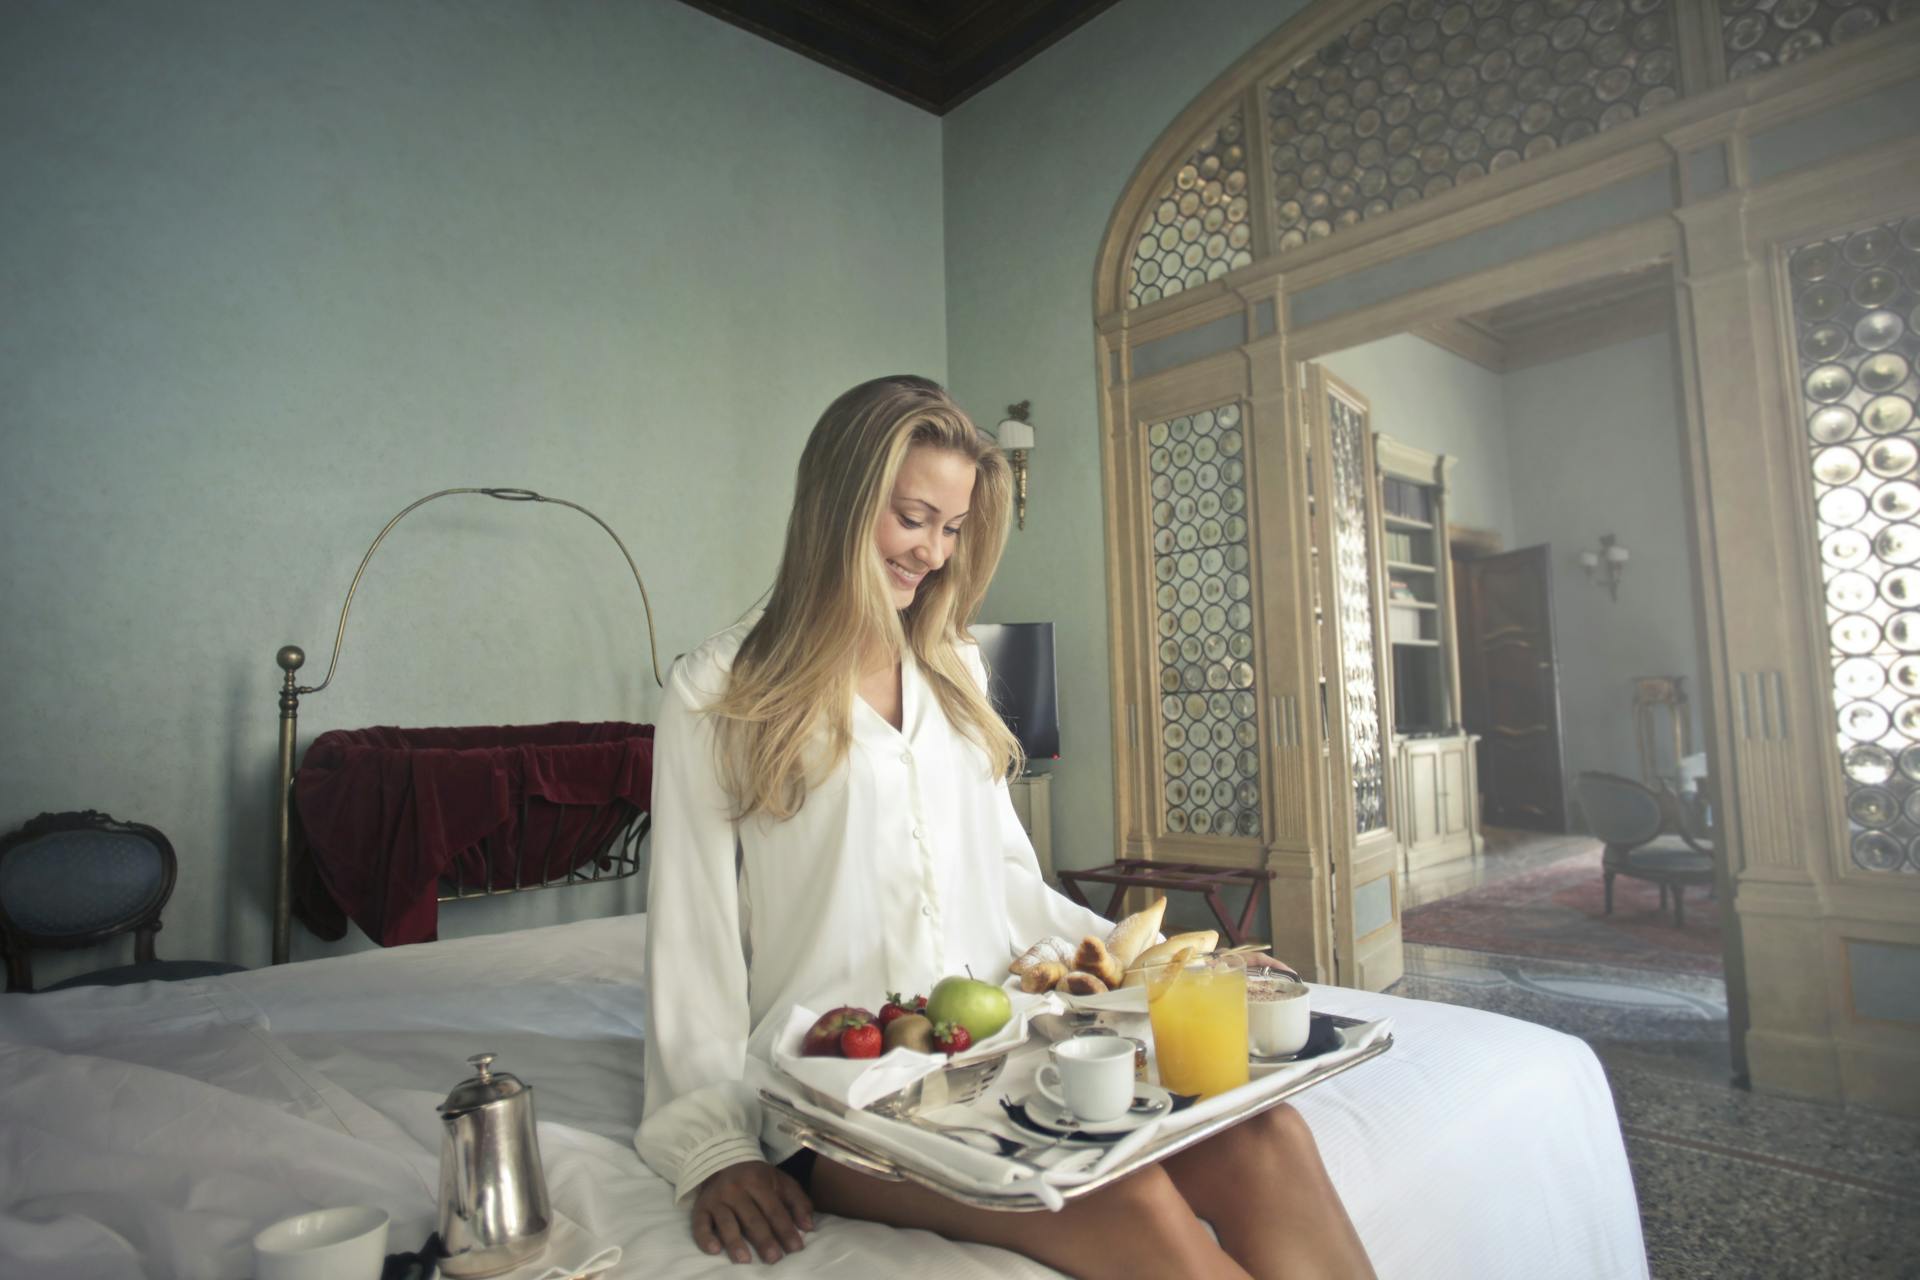 A cheerful woman with breakfast on tray in a hotel bedroom | Source: Pexels